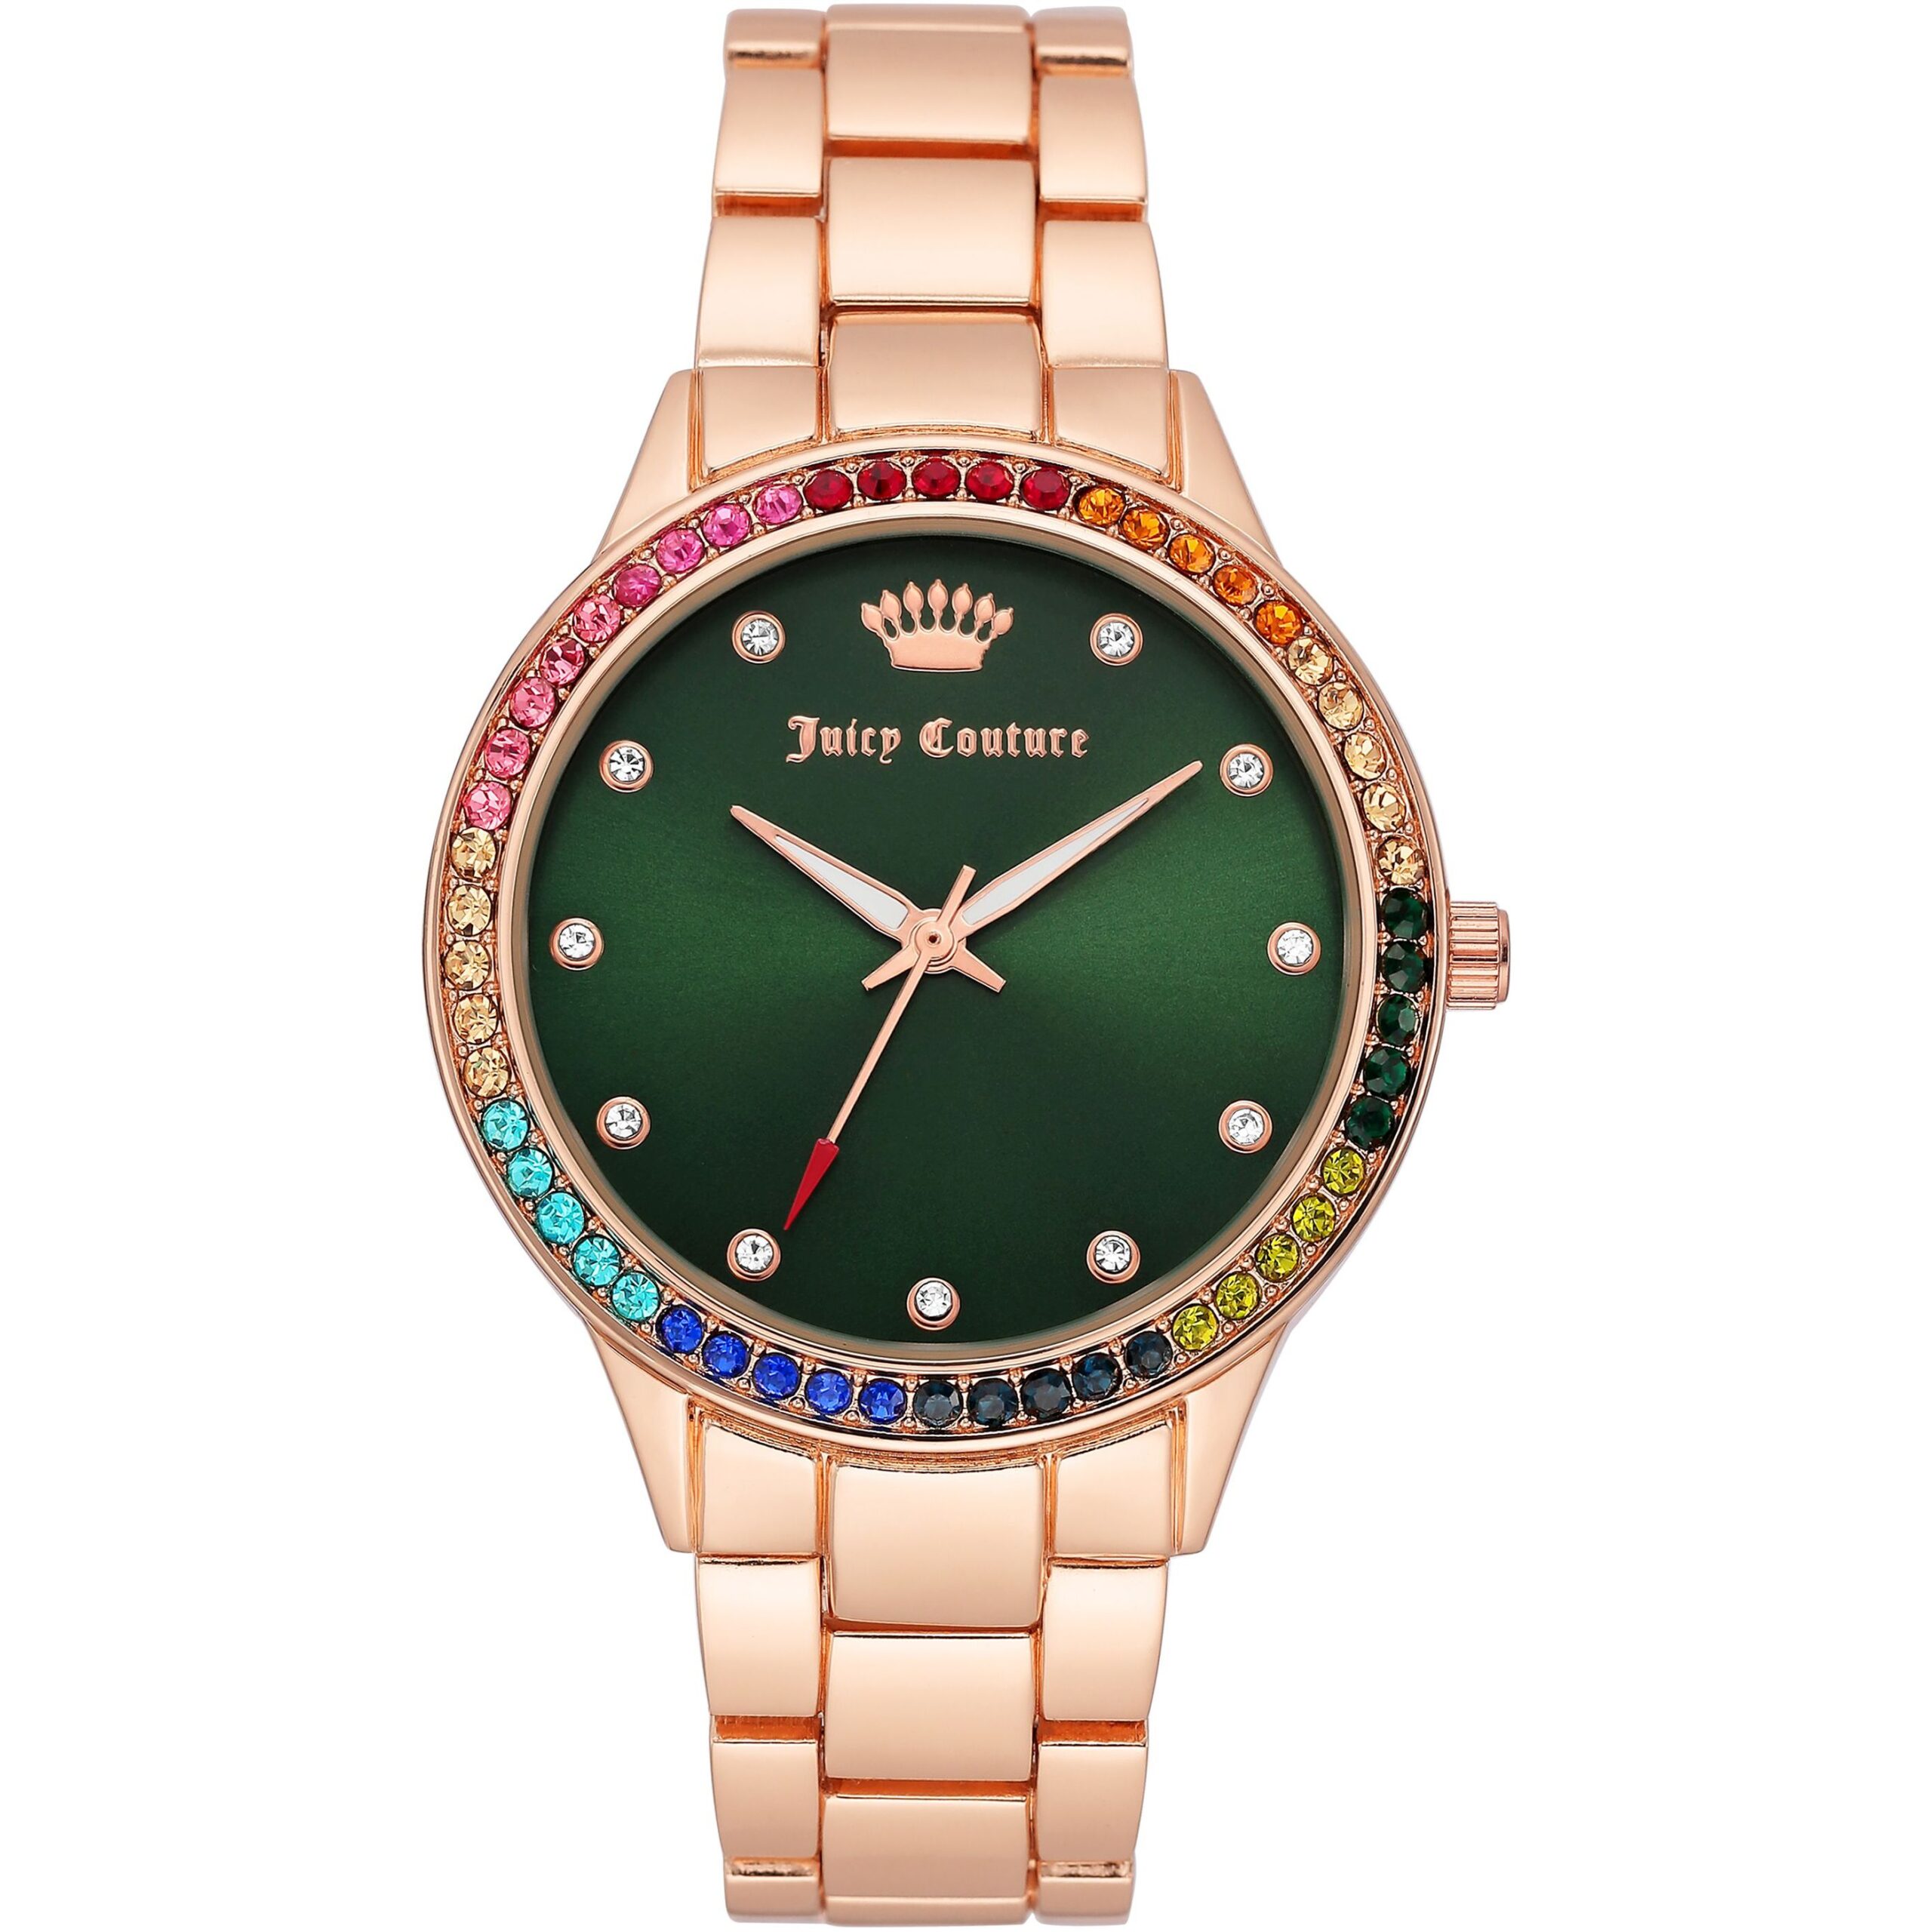 Juicy Couture watch repairs